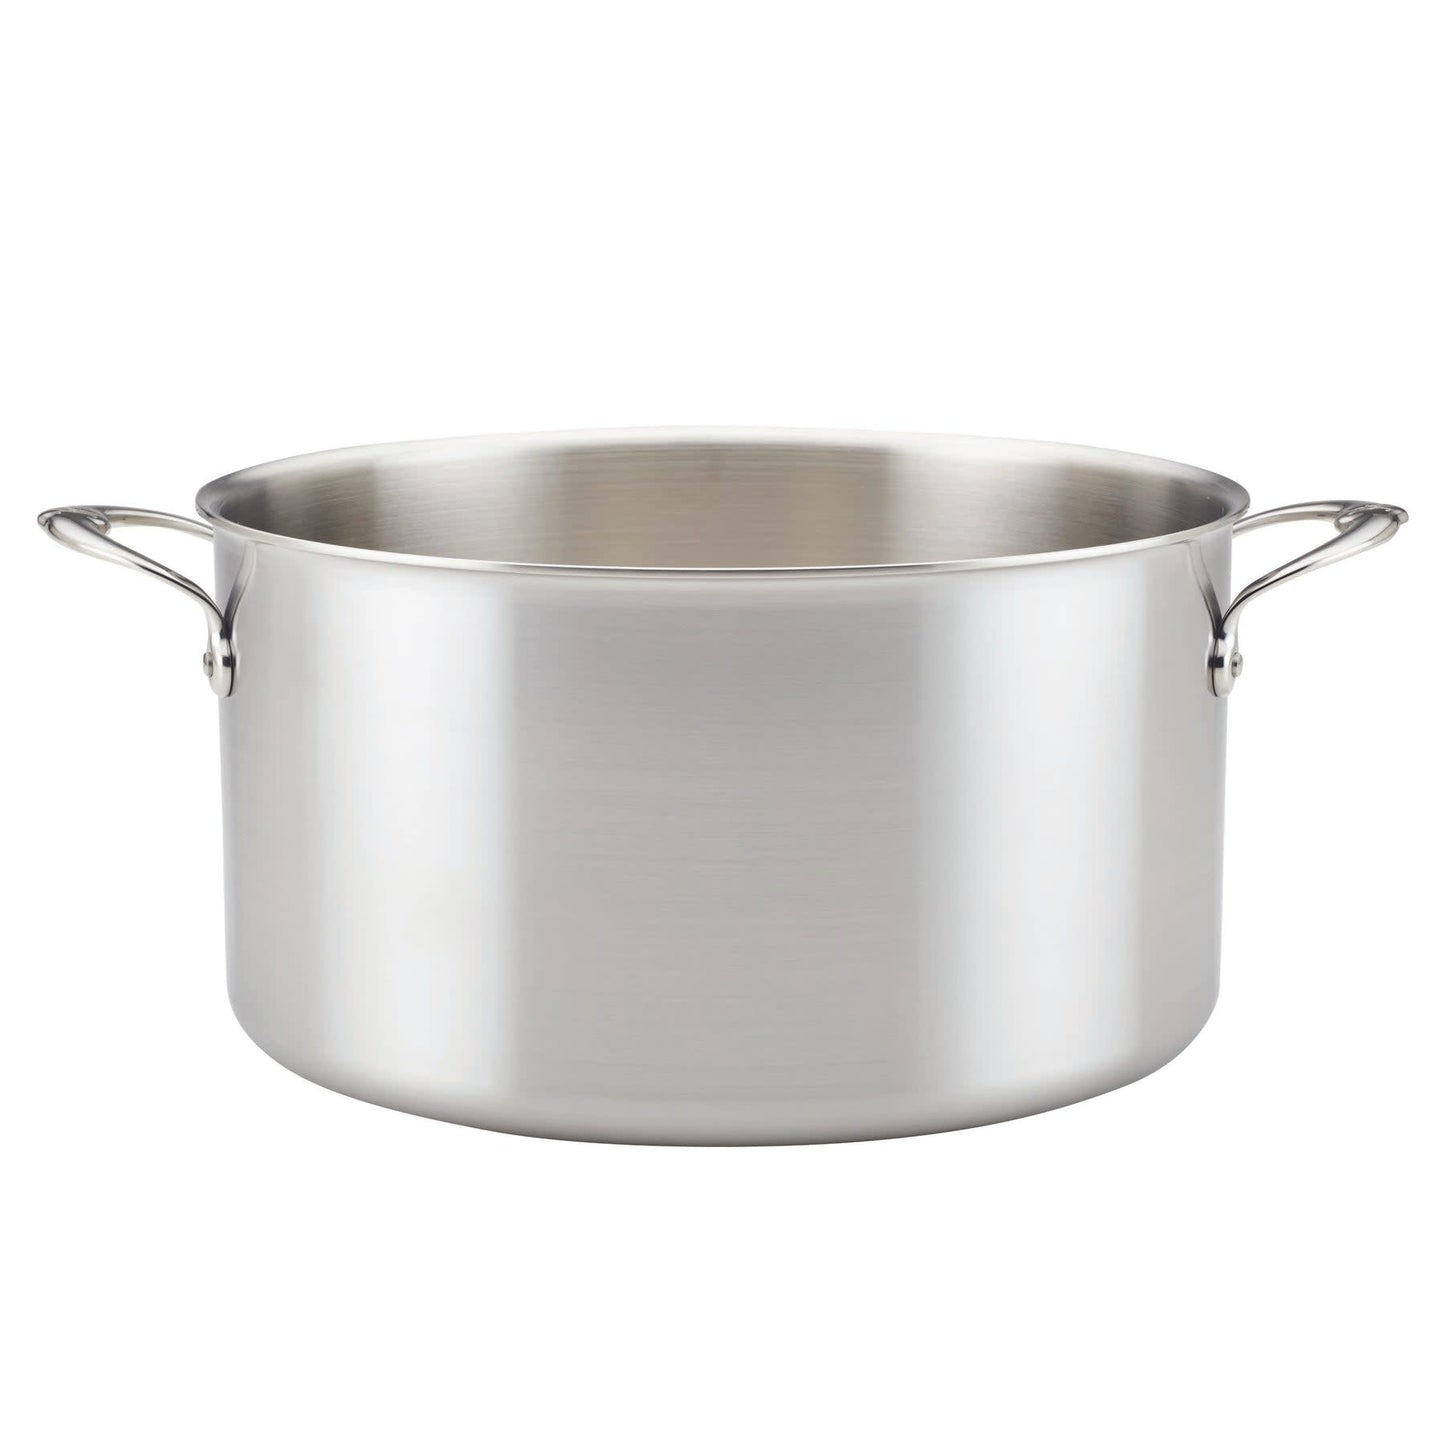 Load image into Gallery viewer, Hestan Thomas Keller Insignia - 12qt Open Stock Pot
